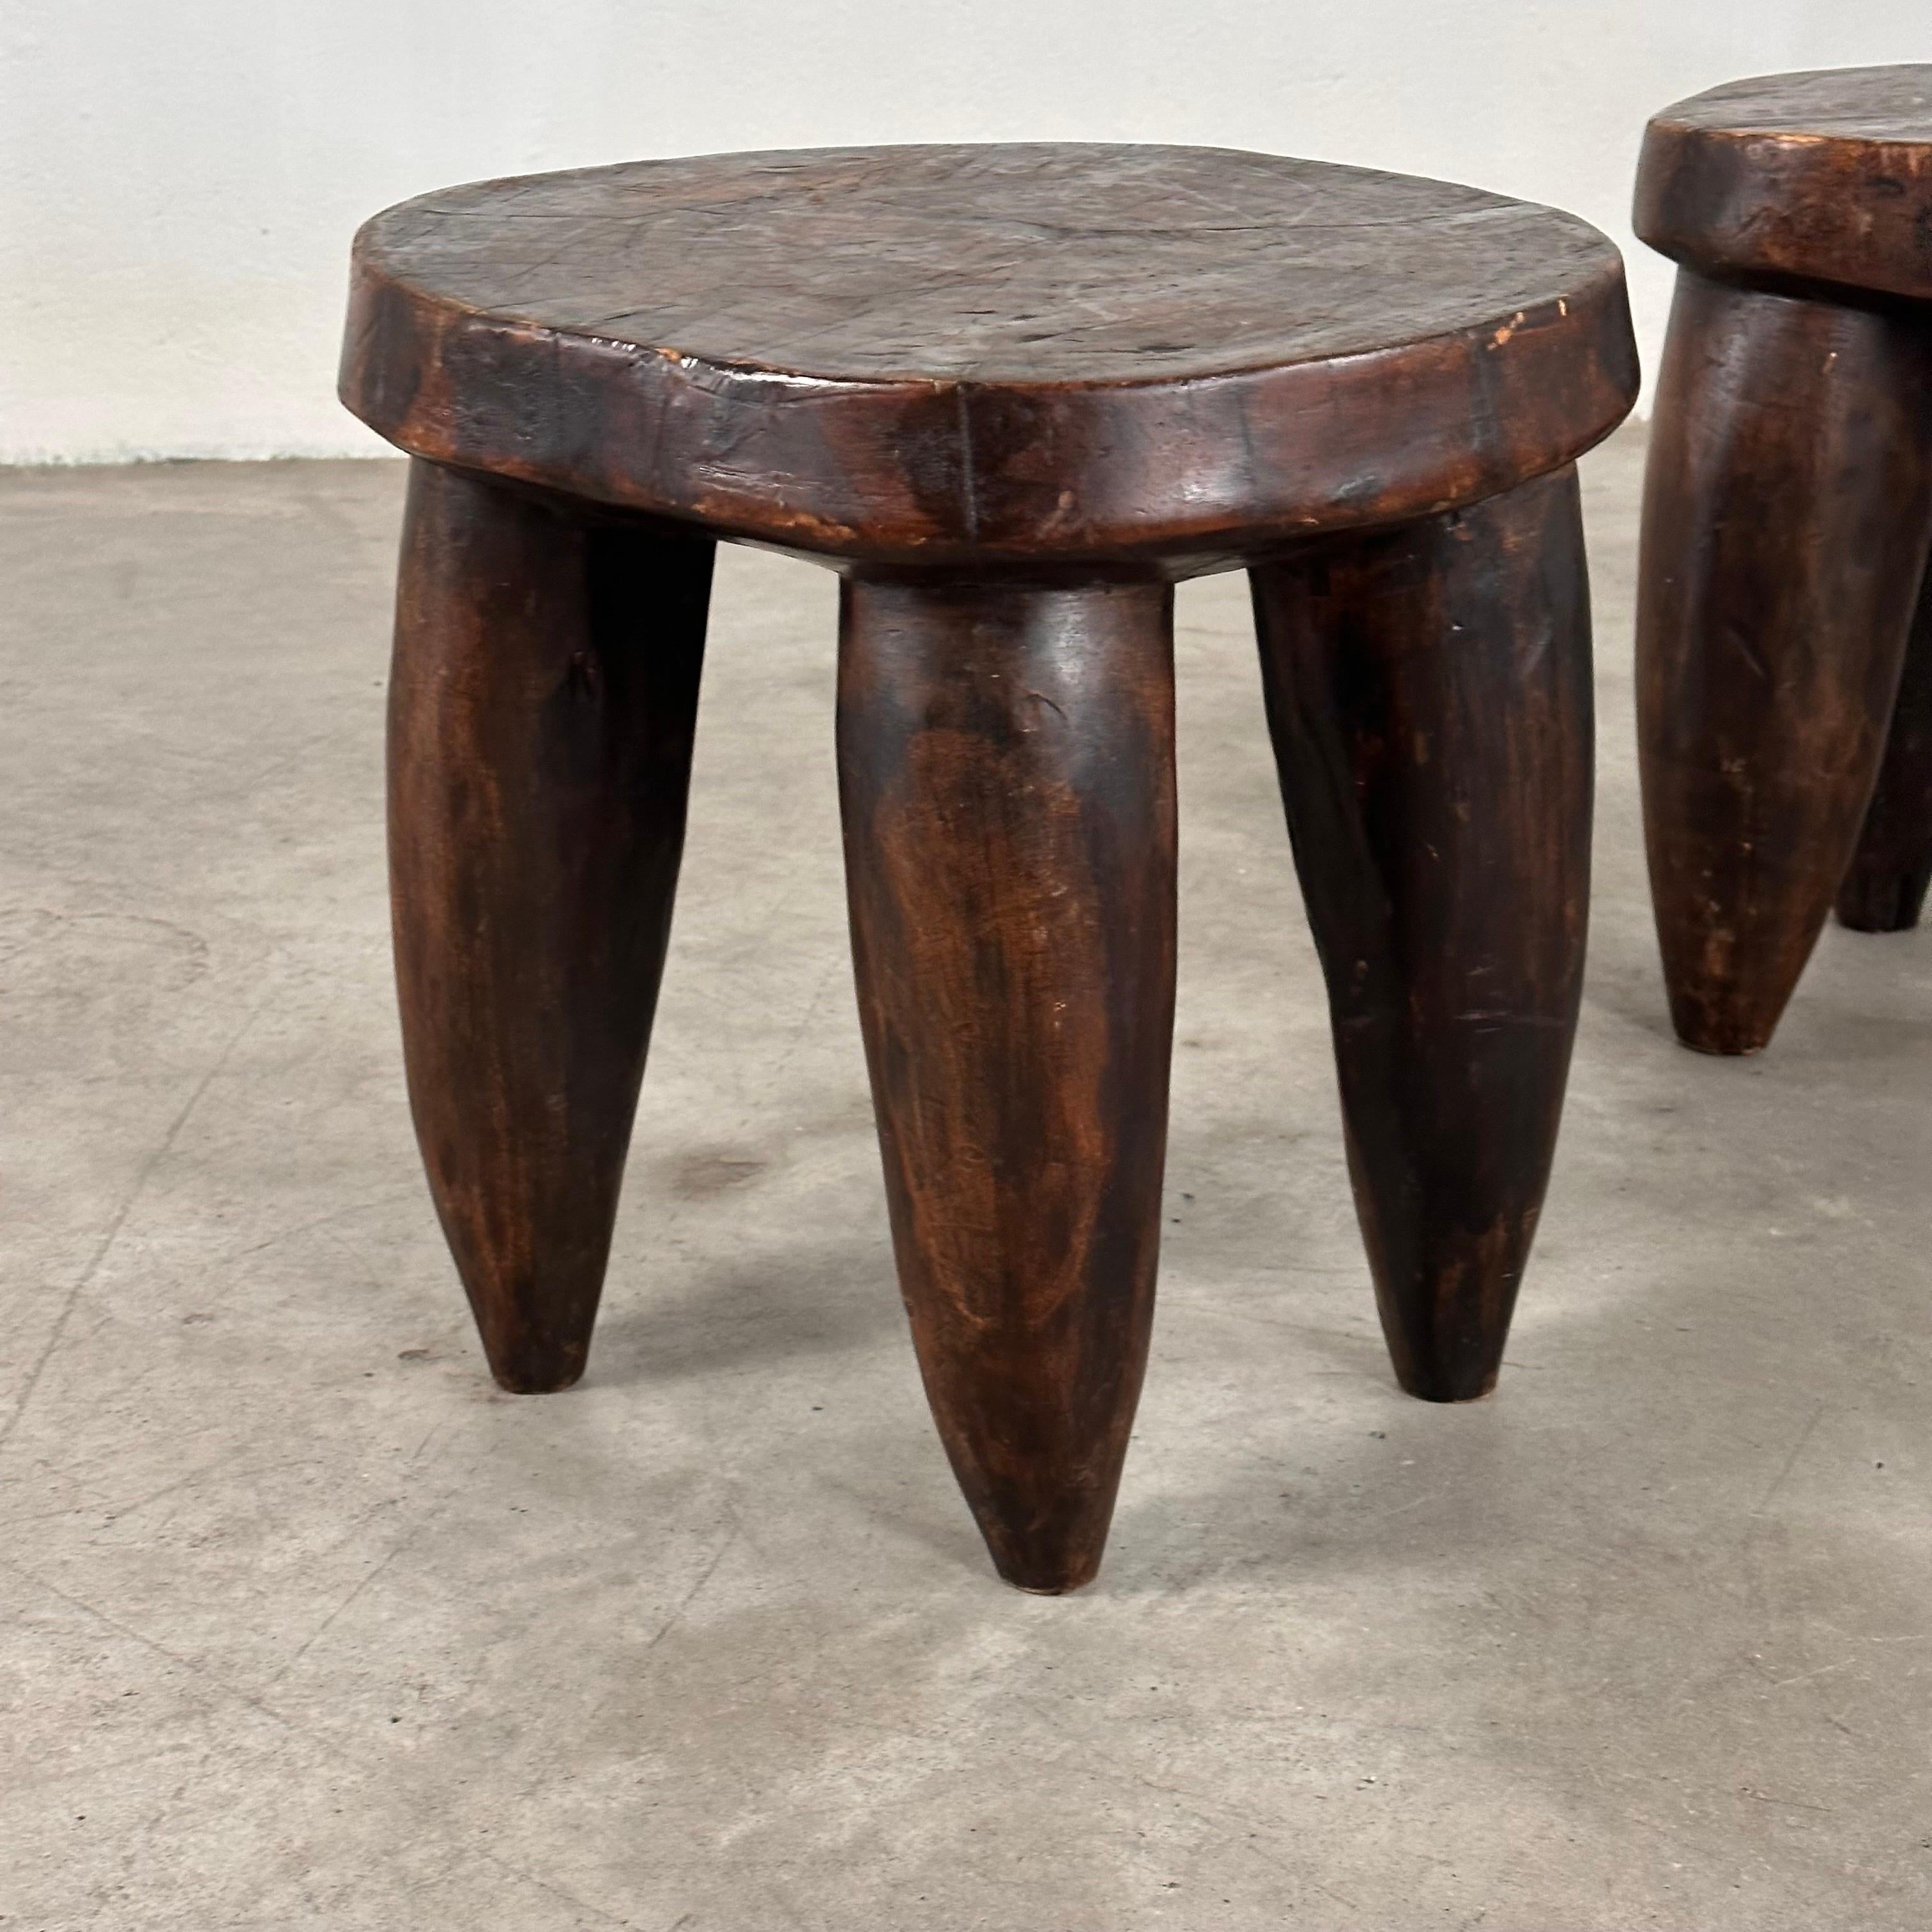 Burkinabe Rare Pair of Large African Senufo Stools, Late 20th Century, Highly Decorative For Sale